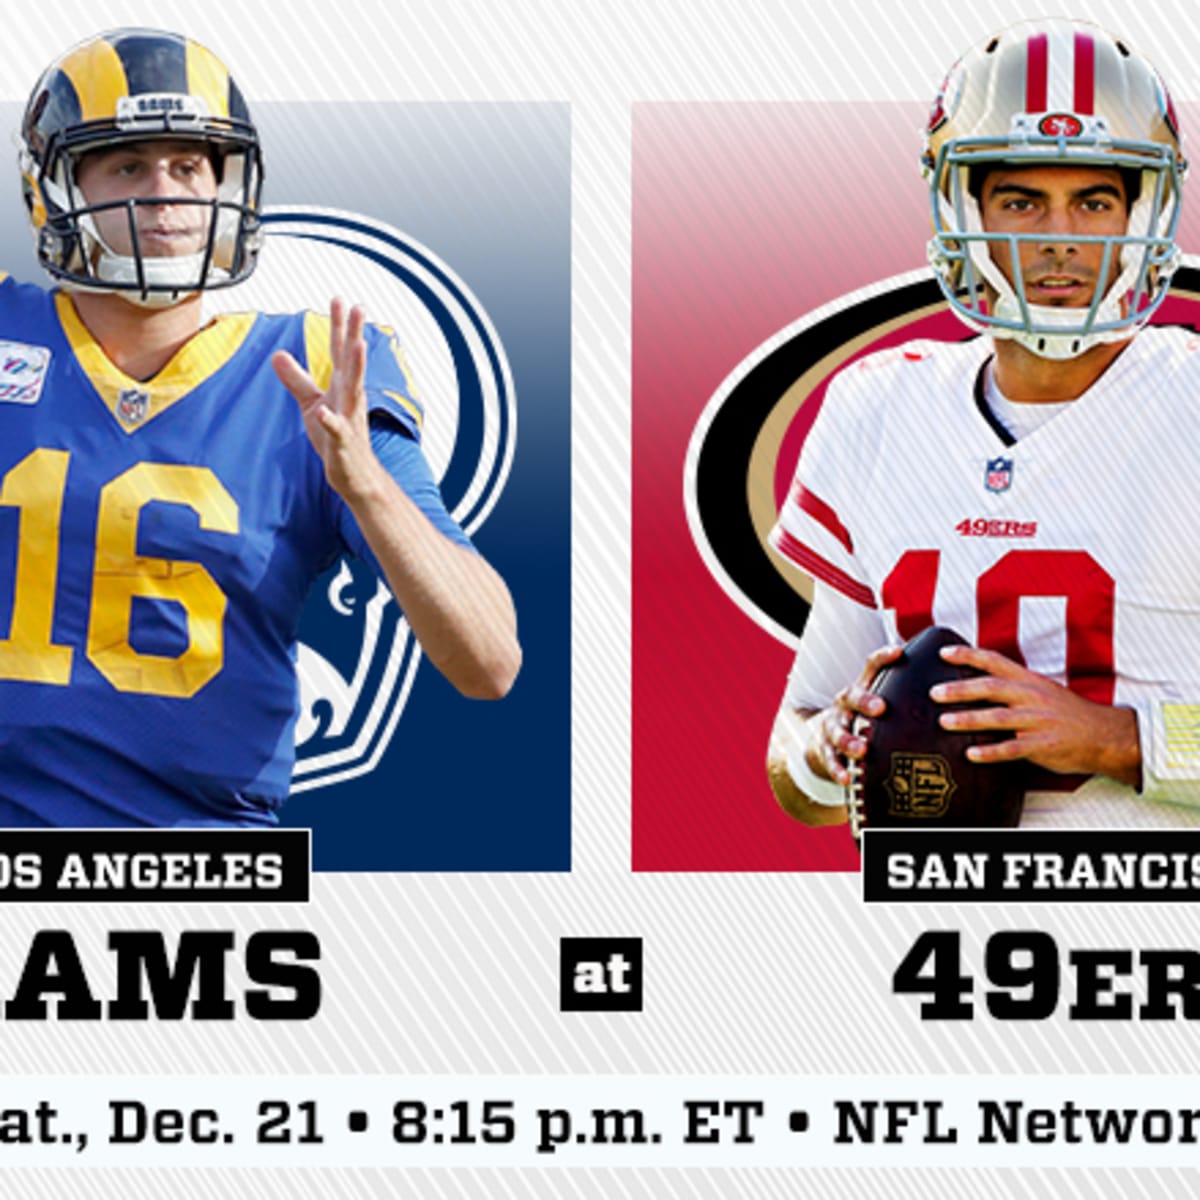 where to watch the rams vs 49ers